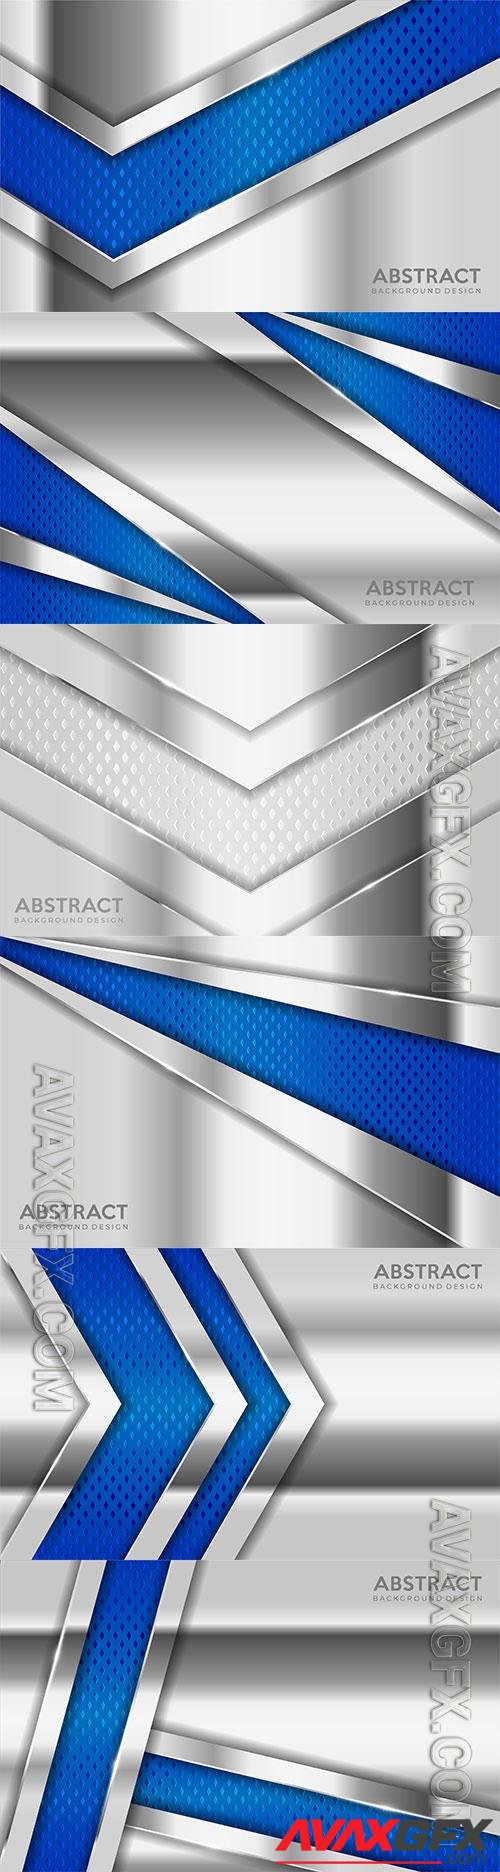 Shinny metal silver background combine with blue textured overlap layer